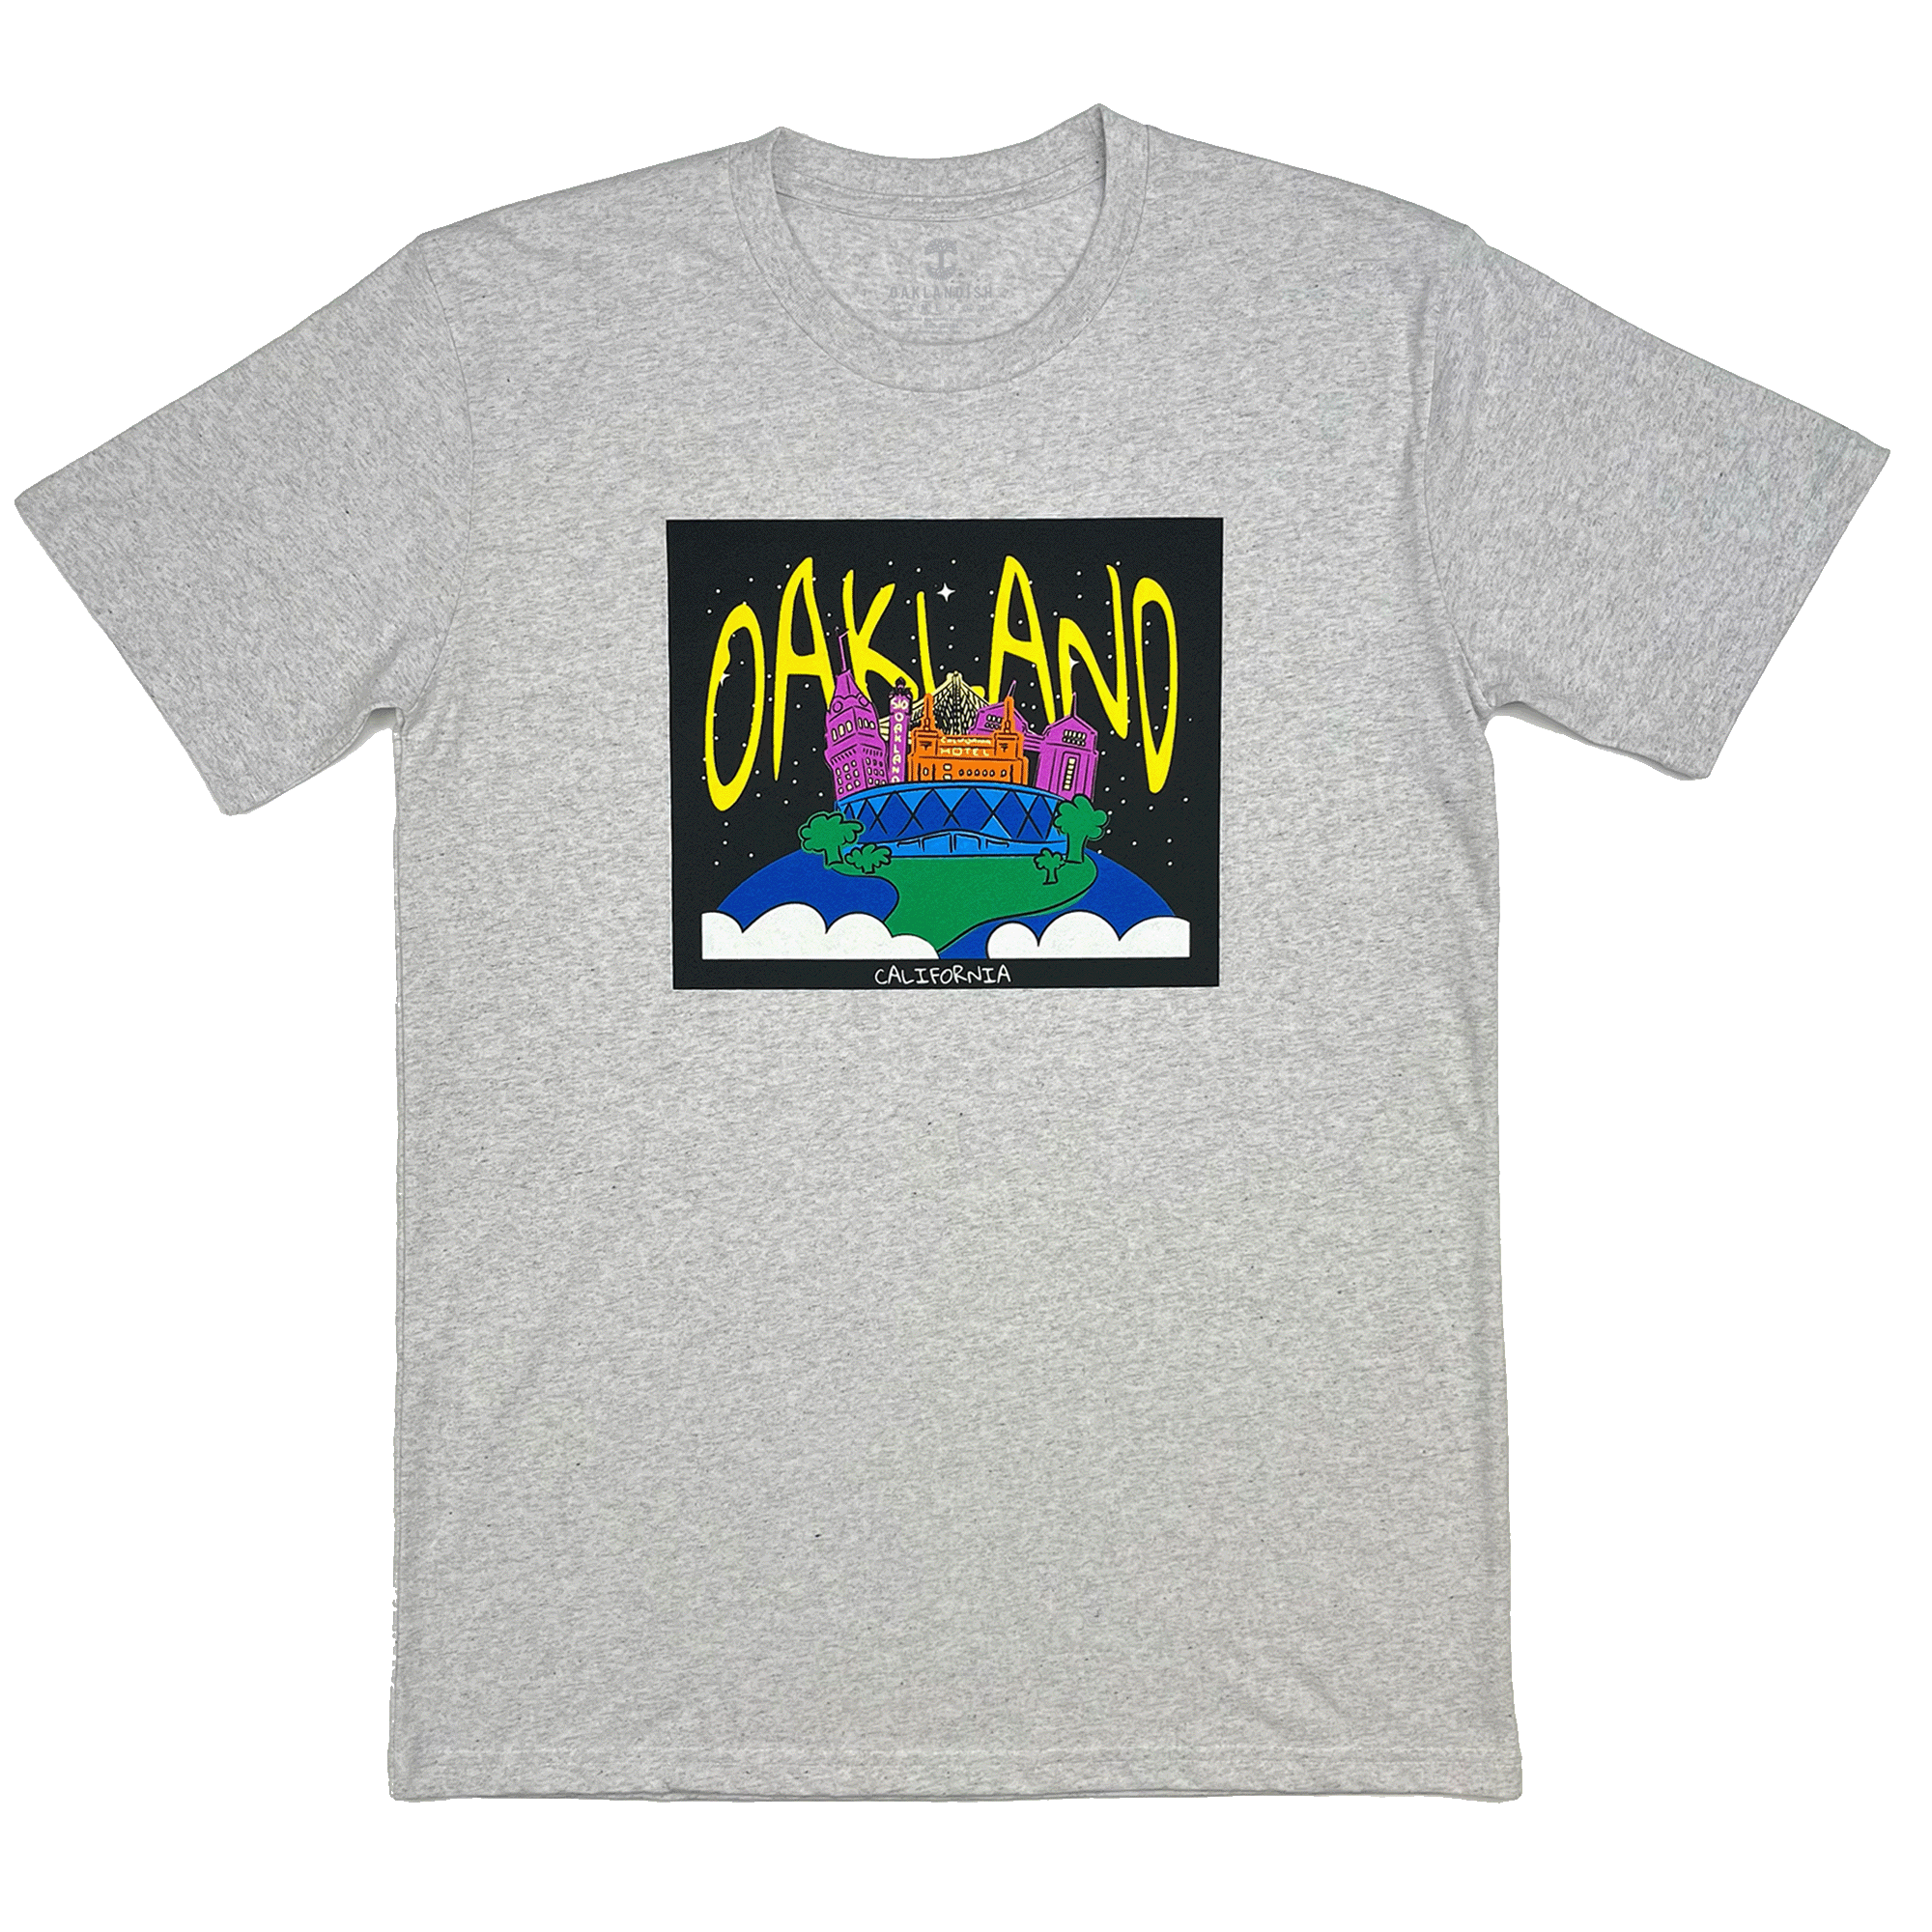 Ash grey cotton t-shirt with Oakland graphic of landmarks.